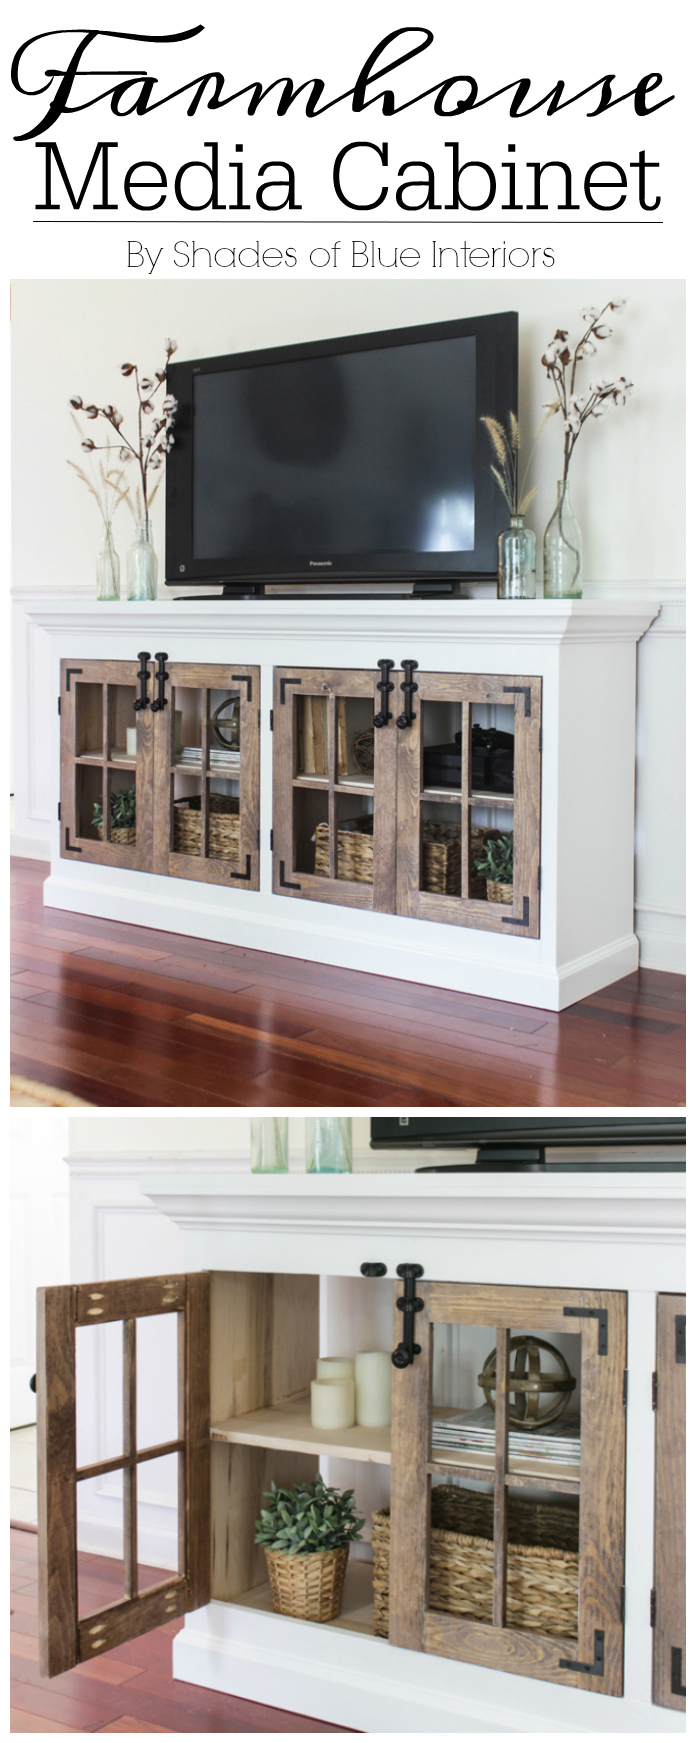 Farmhouse Media Cabinet with free build plans